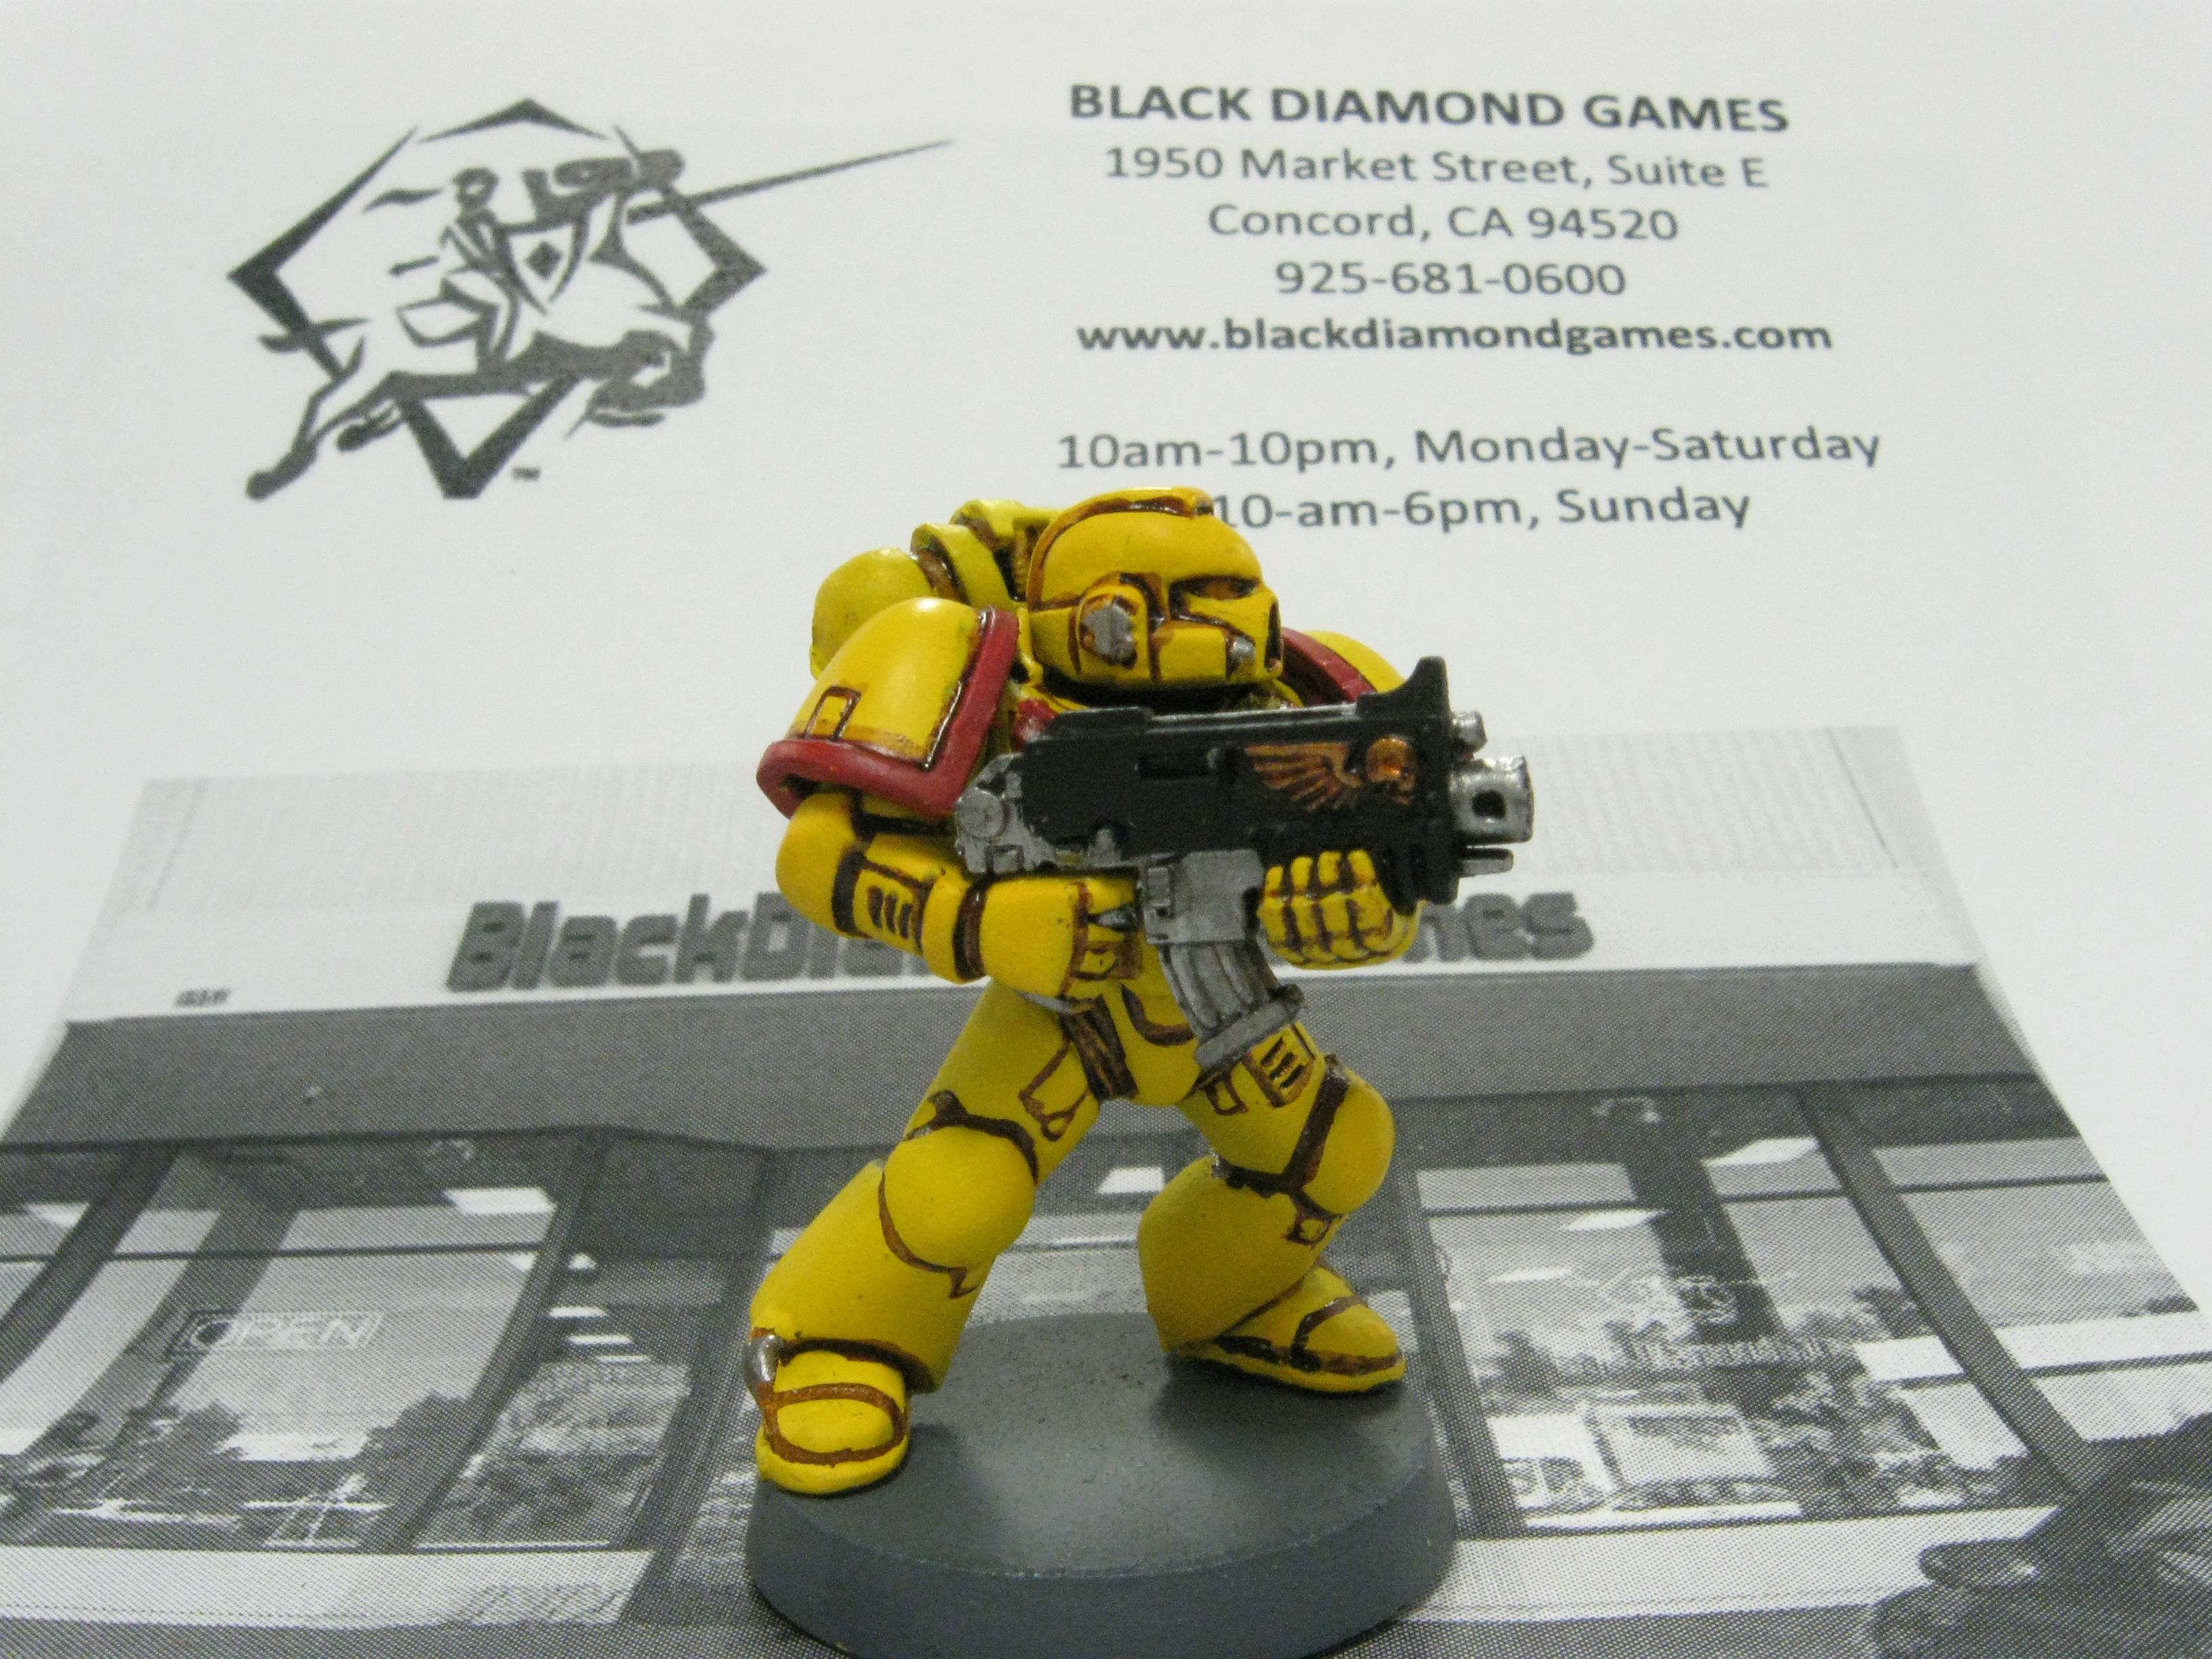 Imperial Fists, Space Marines, Tactical Squad, Warhammer 40,000